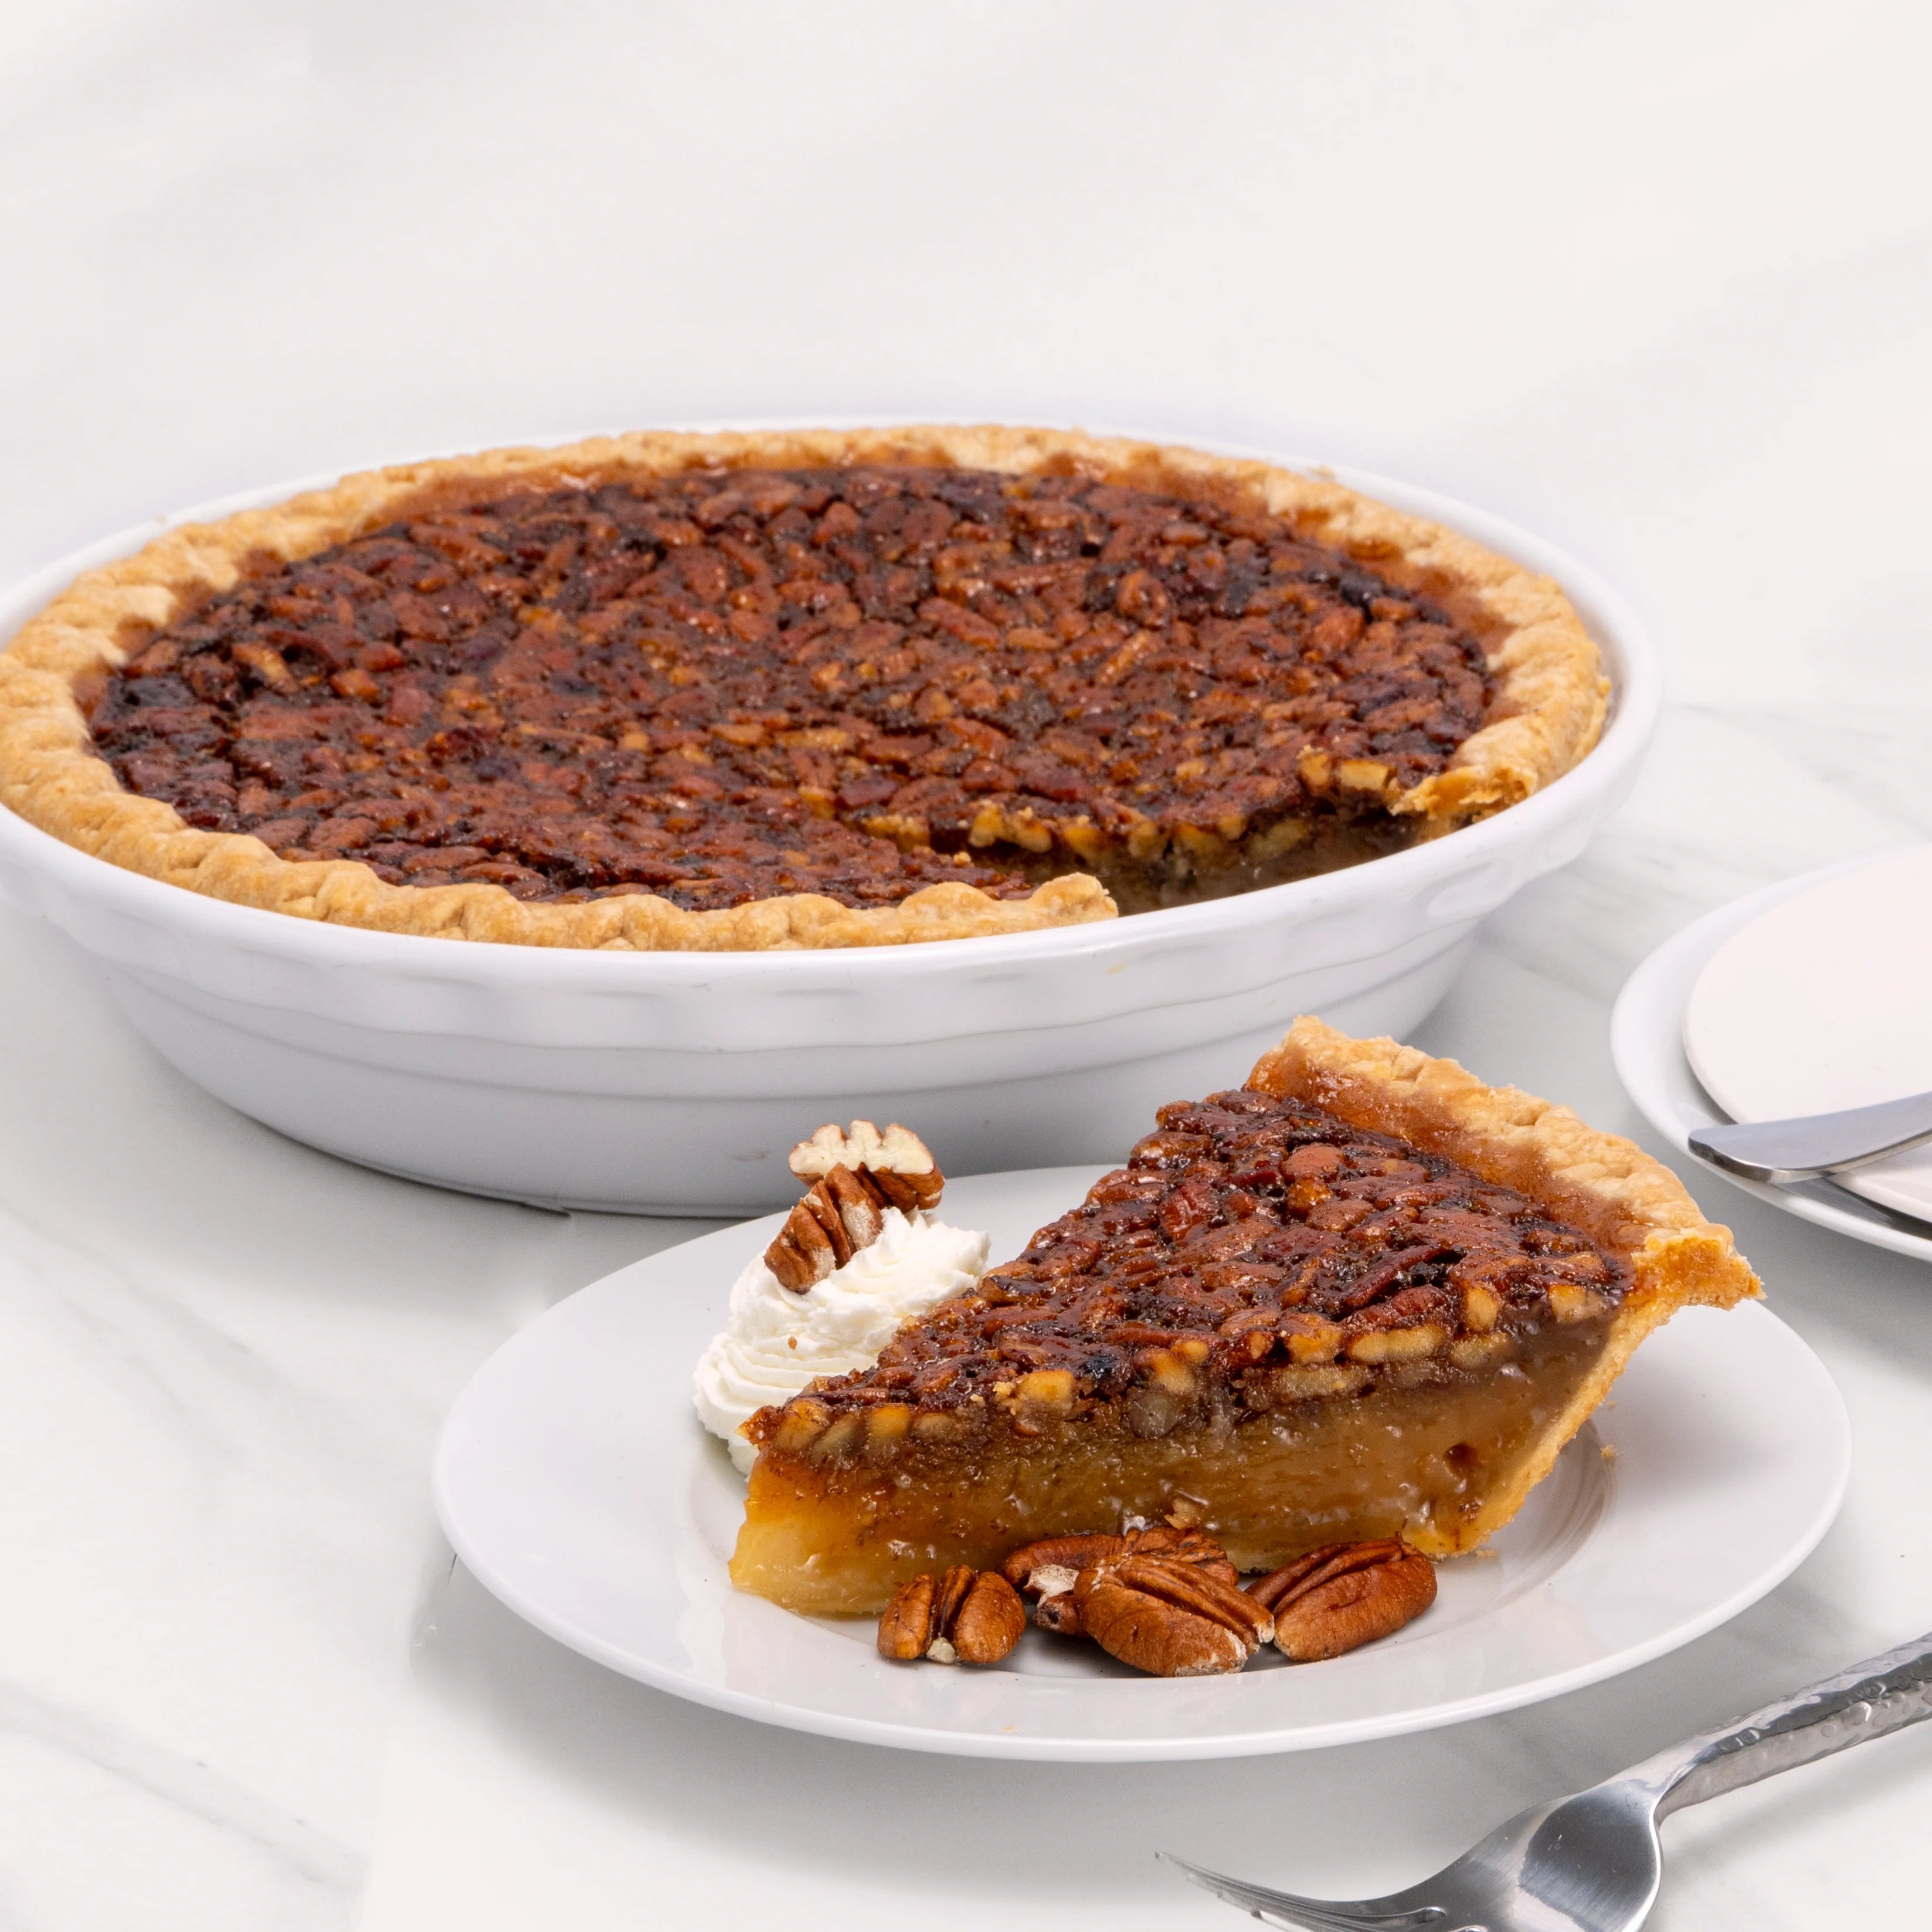 Slice of Pecan Pie, garnished with pecans and crème, in front of an 11" pie from which it was cut.